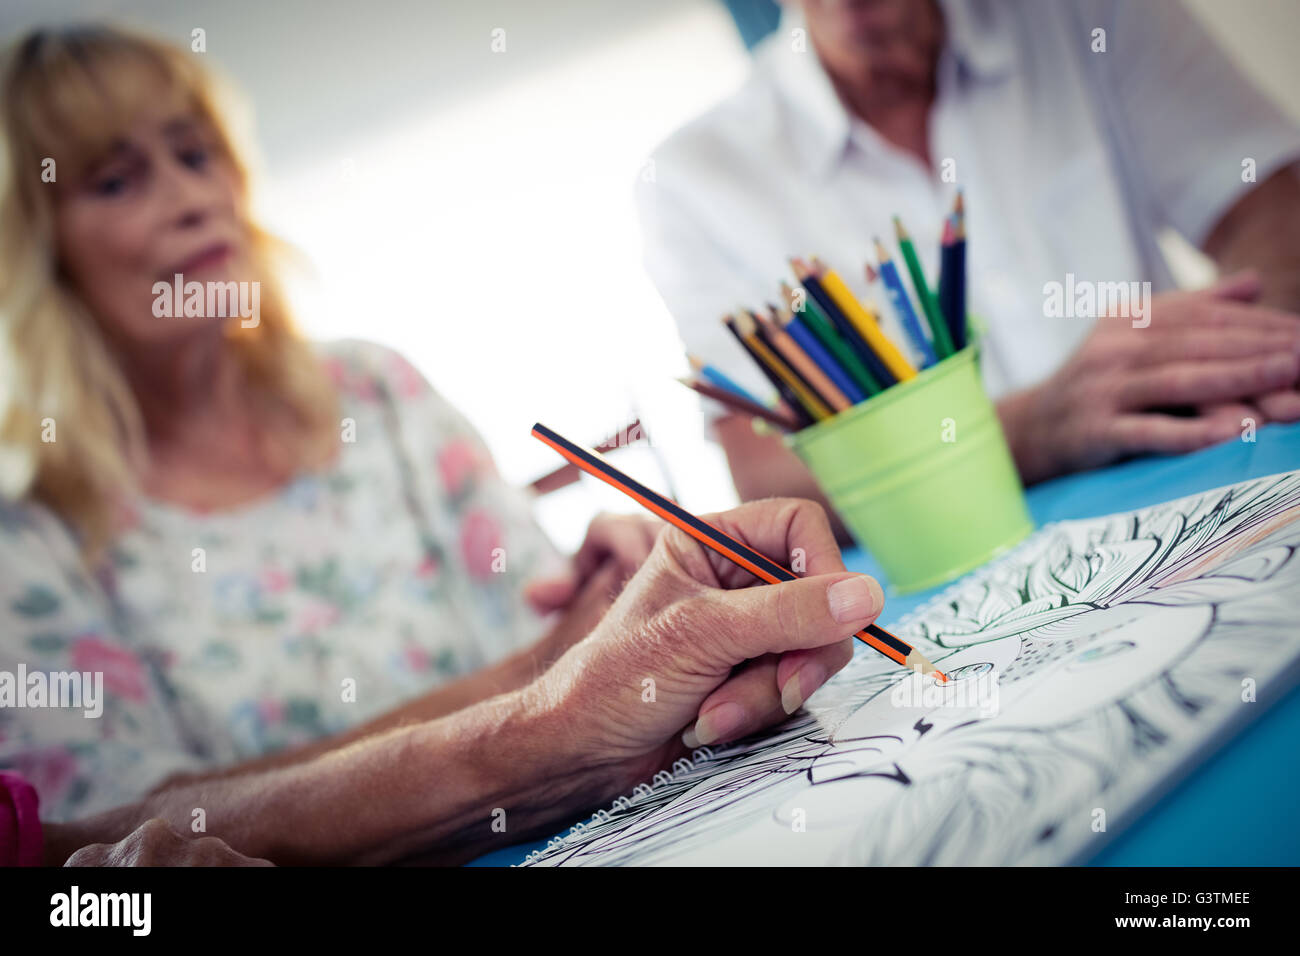 Close up of hand colouring Stock Photo